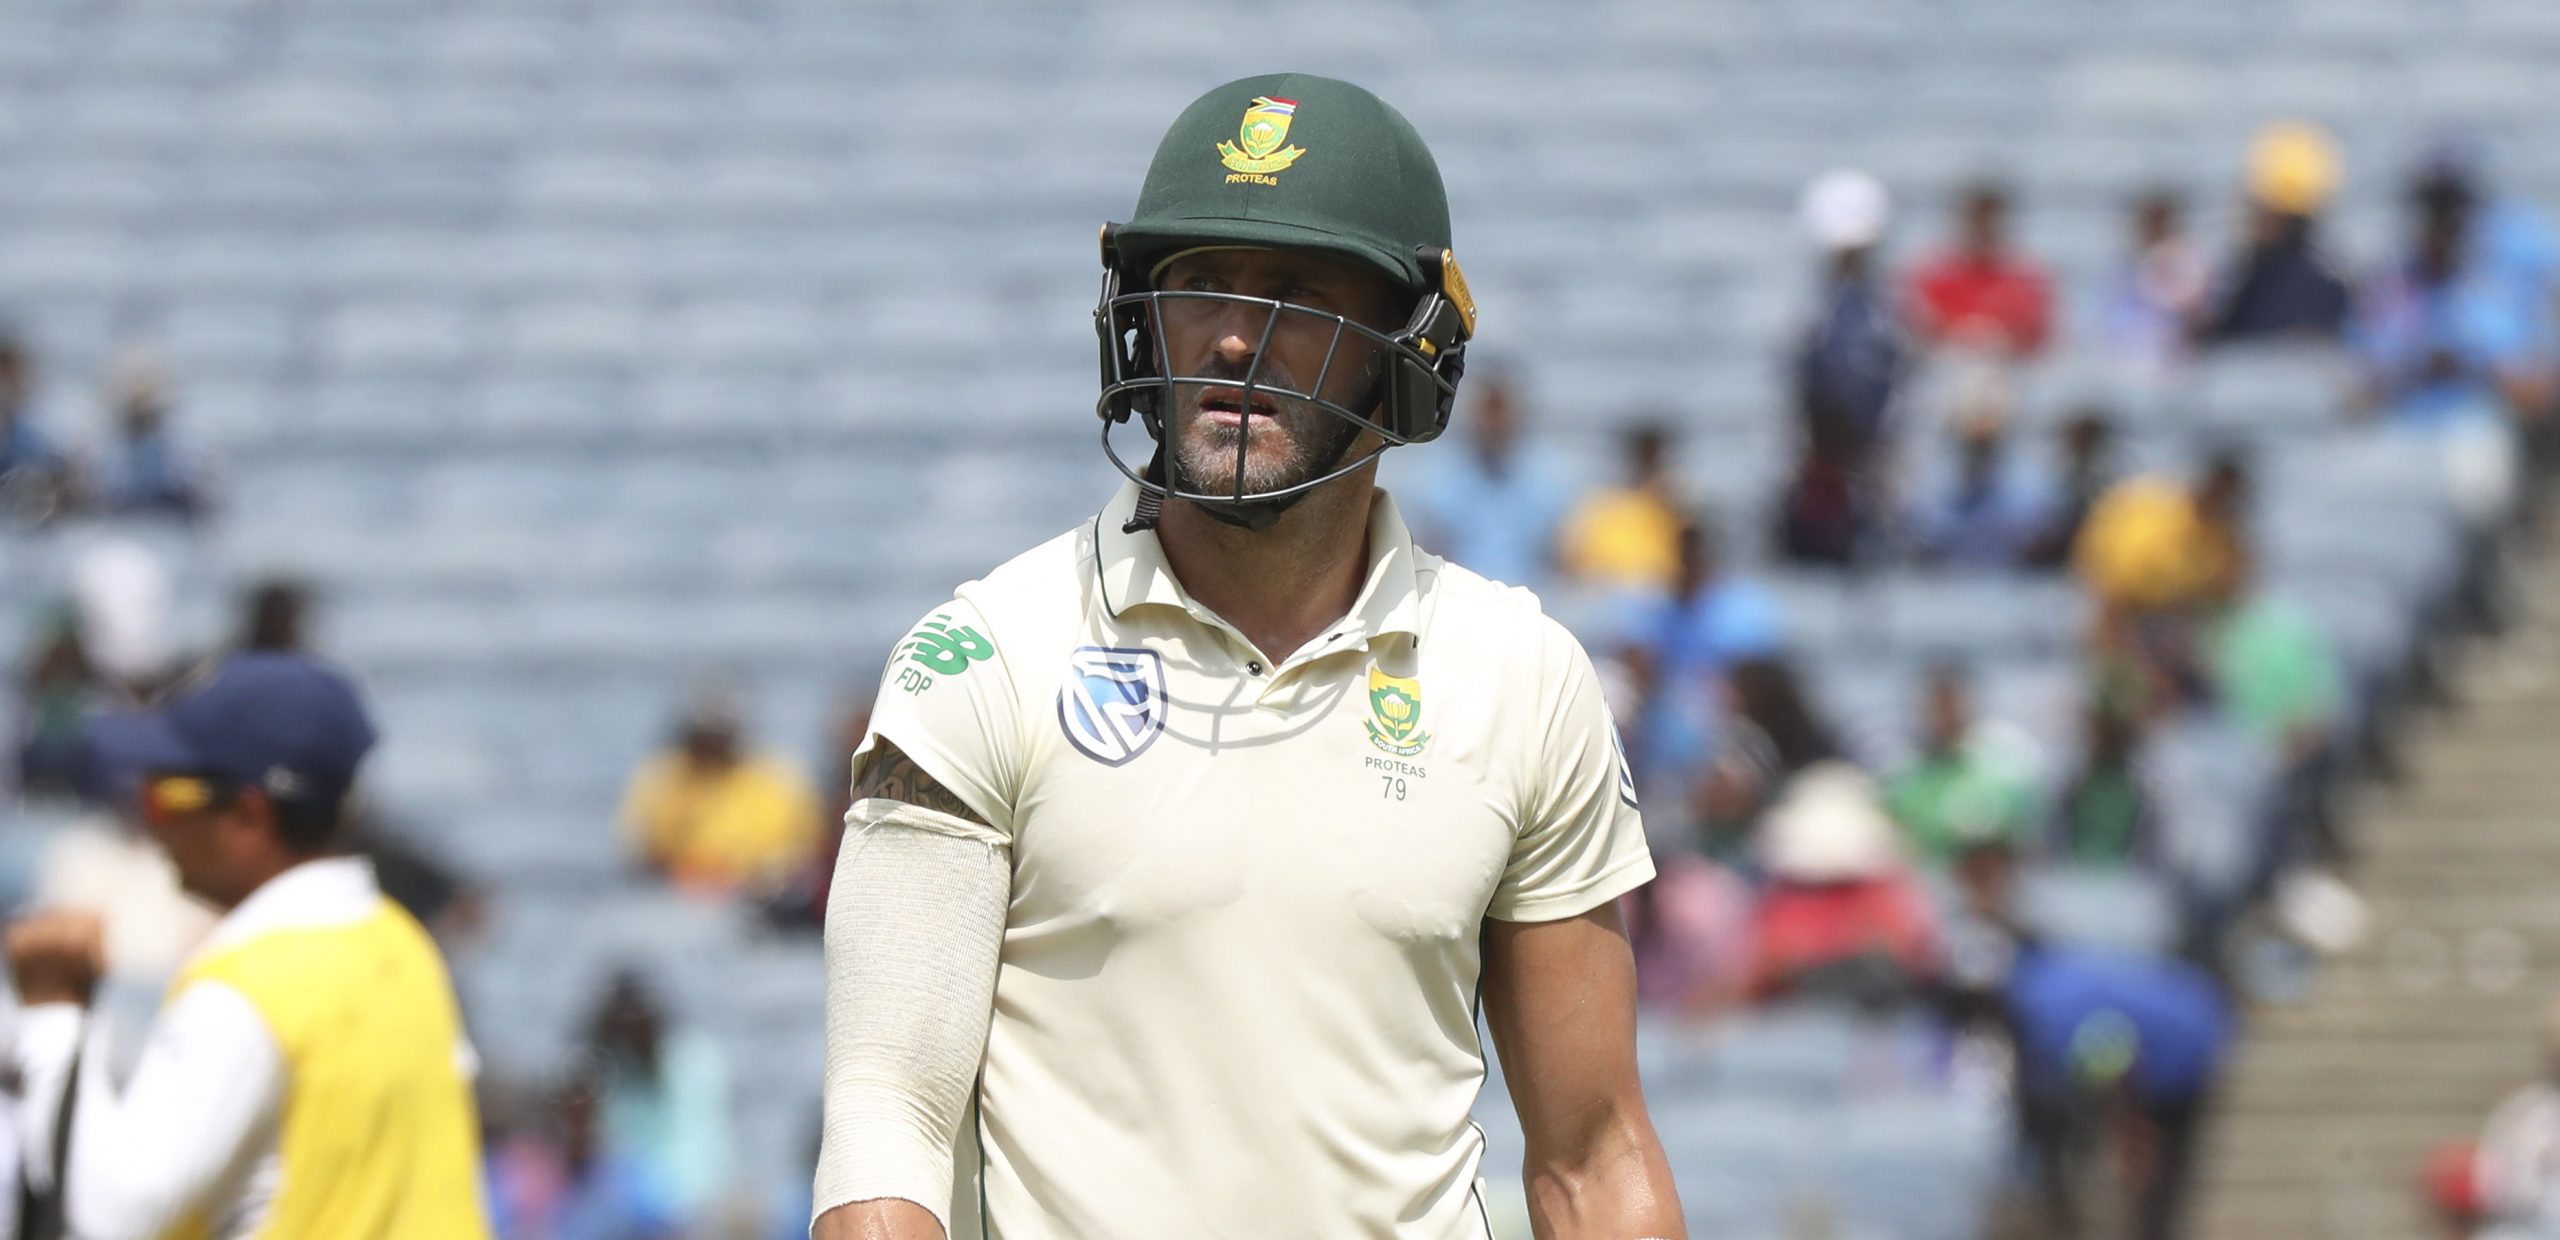 “In cricket, you fail a lot more than you succeed” – Faf du Plessis